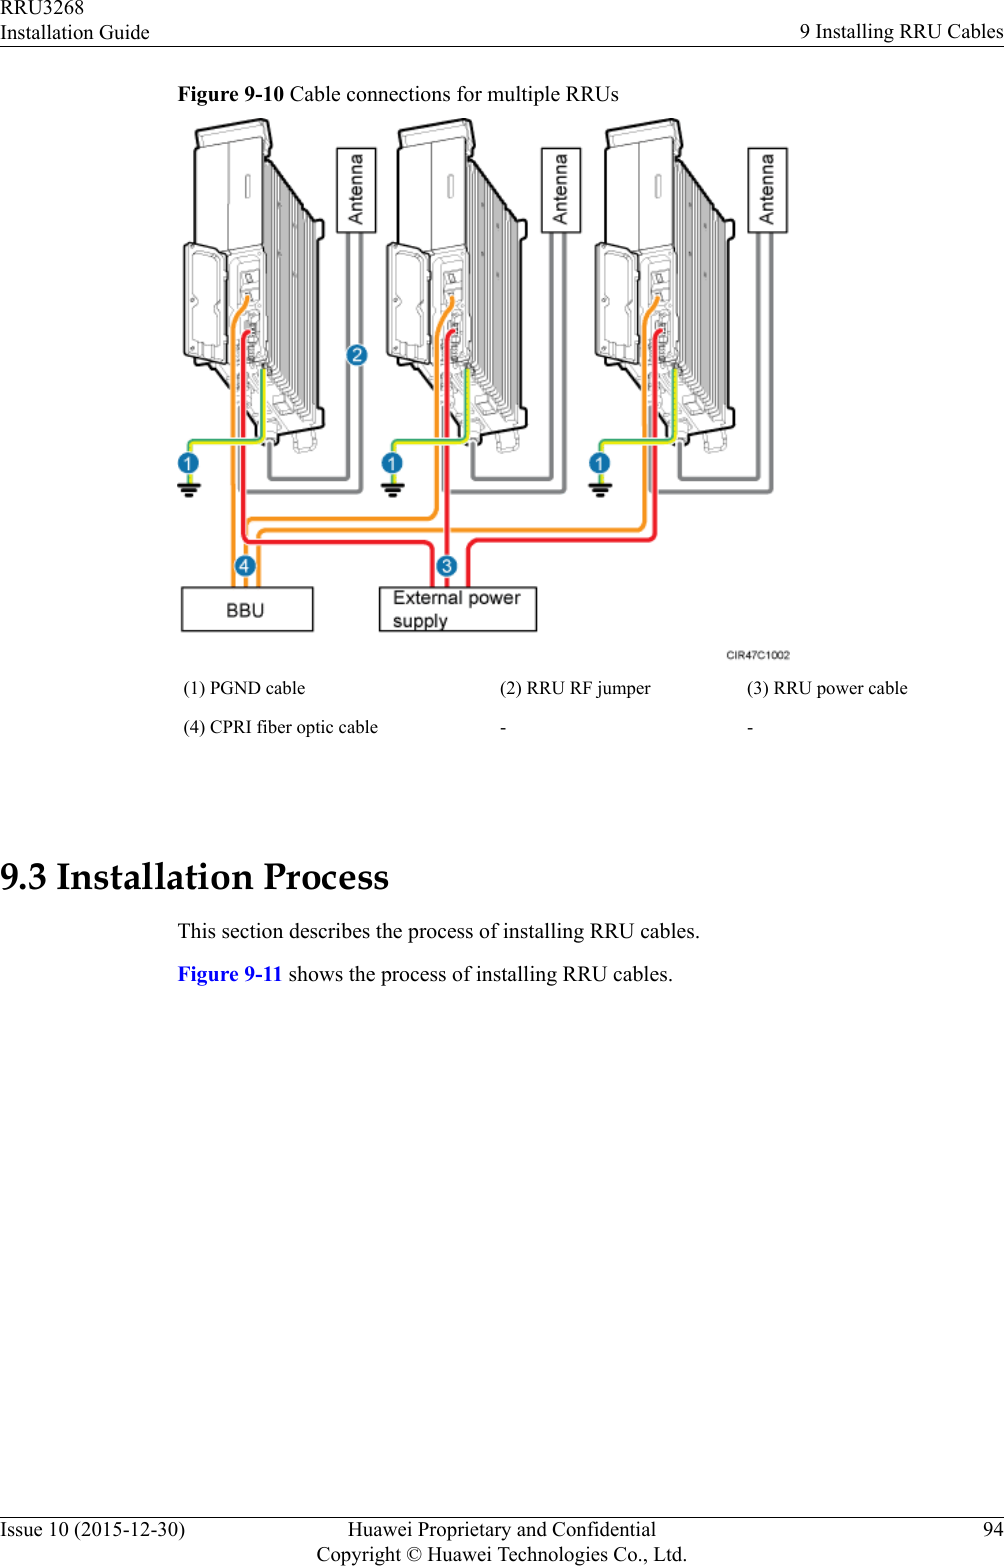 Figure 9-10 Cable connections for multiple RRUs(1) PGND cable (2) RRU RF jumper (3) RRU power cable(4) CPRI fiber optic cable - - 9.3 Installation ProcessThis section describes the process of installing RRU cables.Figure 9-11 shows the process of installing RRU cables.RRU3268Installation Guide 9 Installing RRU CablesIssue 10 (2015-12-30) Huawei Proprietary and ConfidentialCopyright © Huawei Technologies Co., Ltd.94